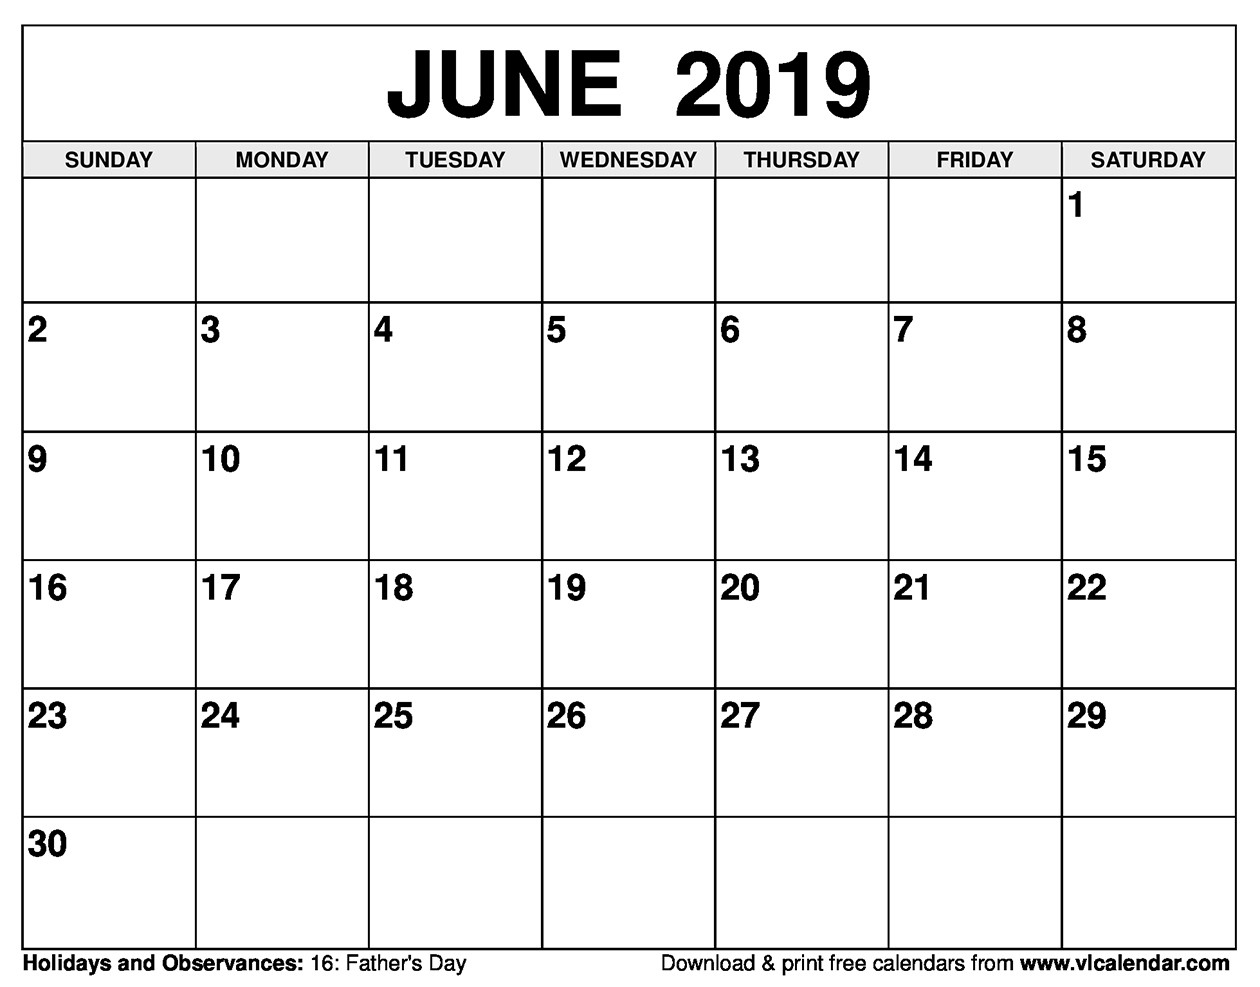 Print Free Calendars Without Downloading Calendar